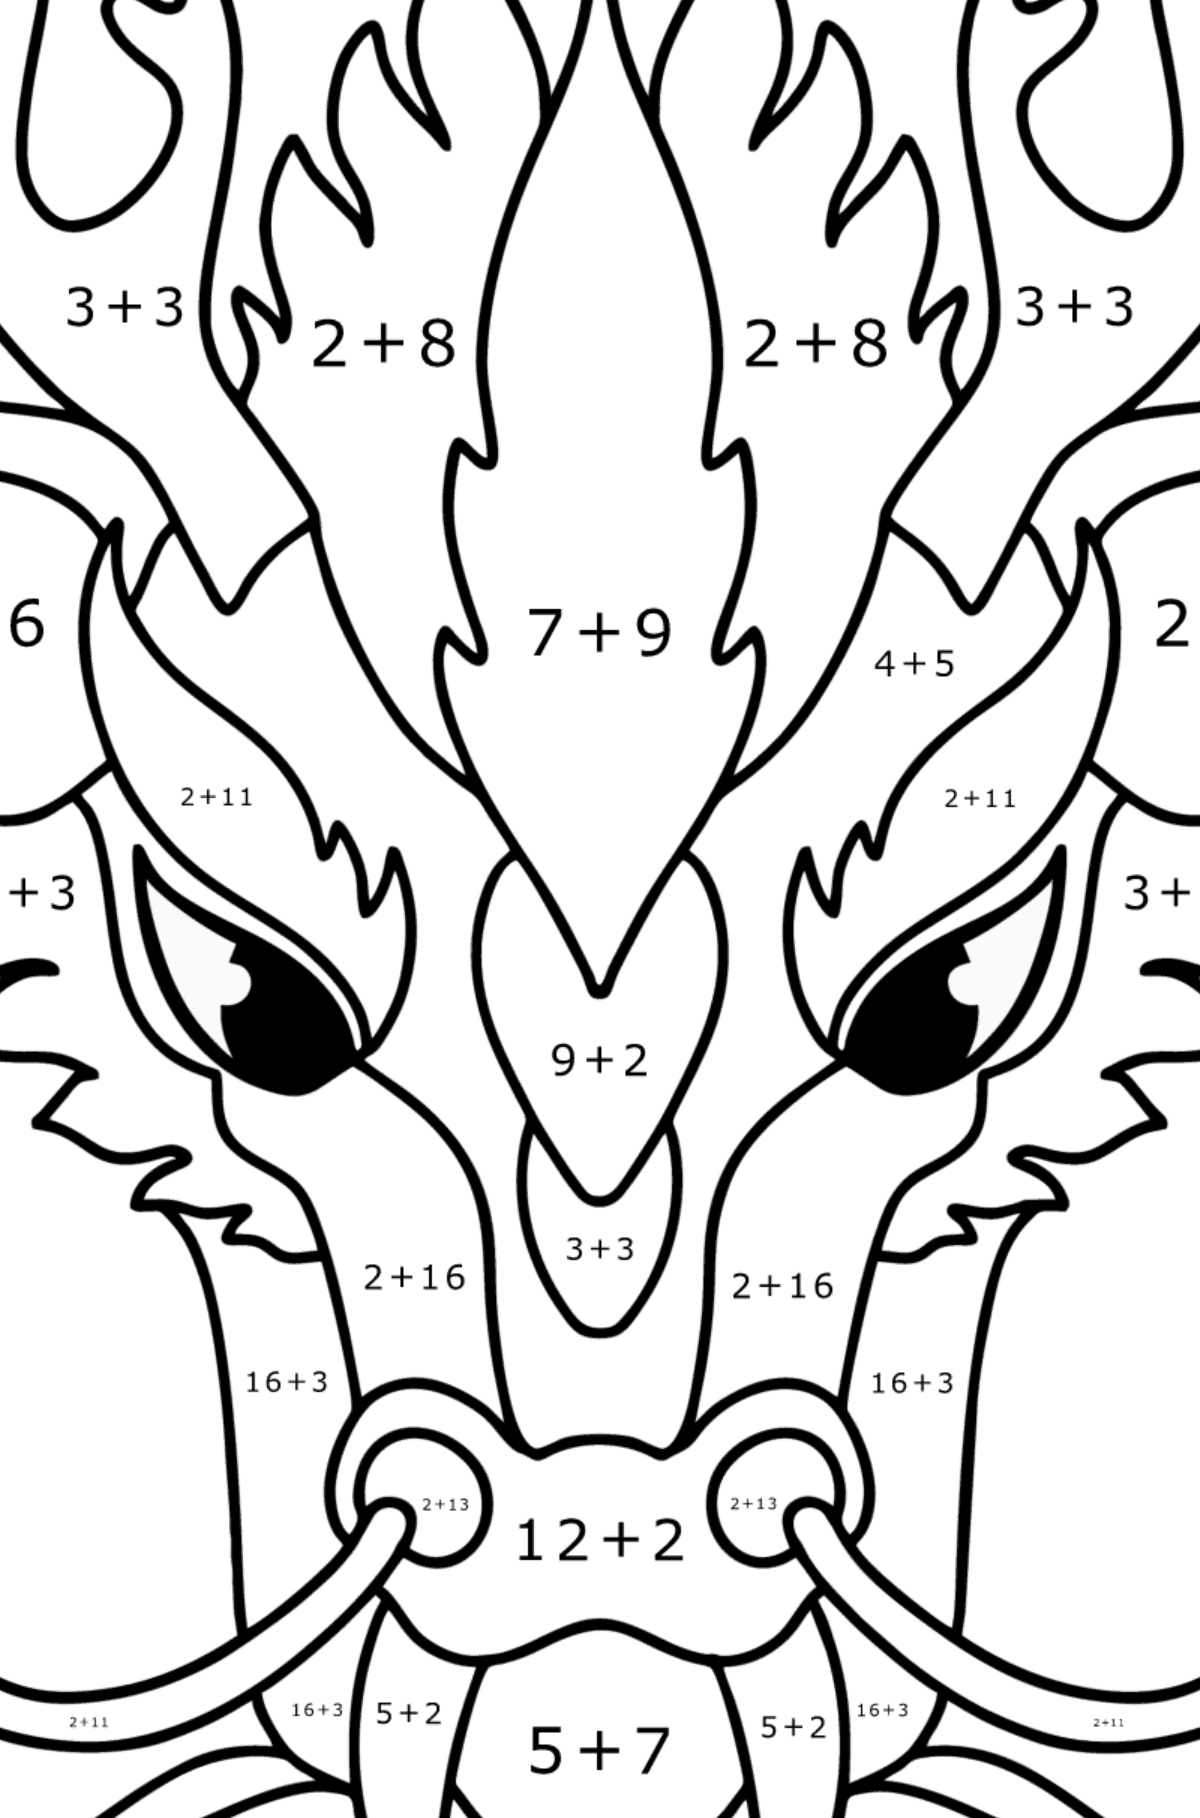 Dragon head coloring page - Math Coloring - Addition for Kids